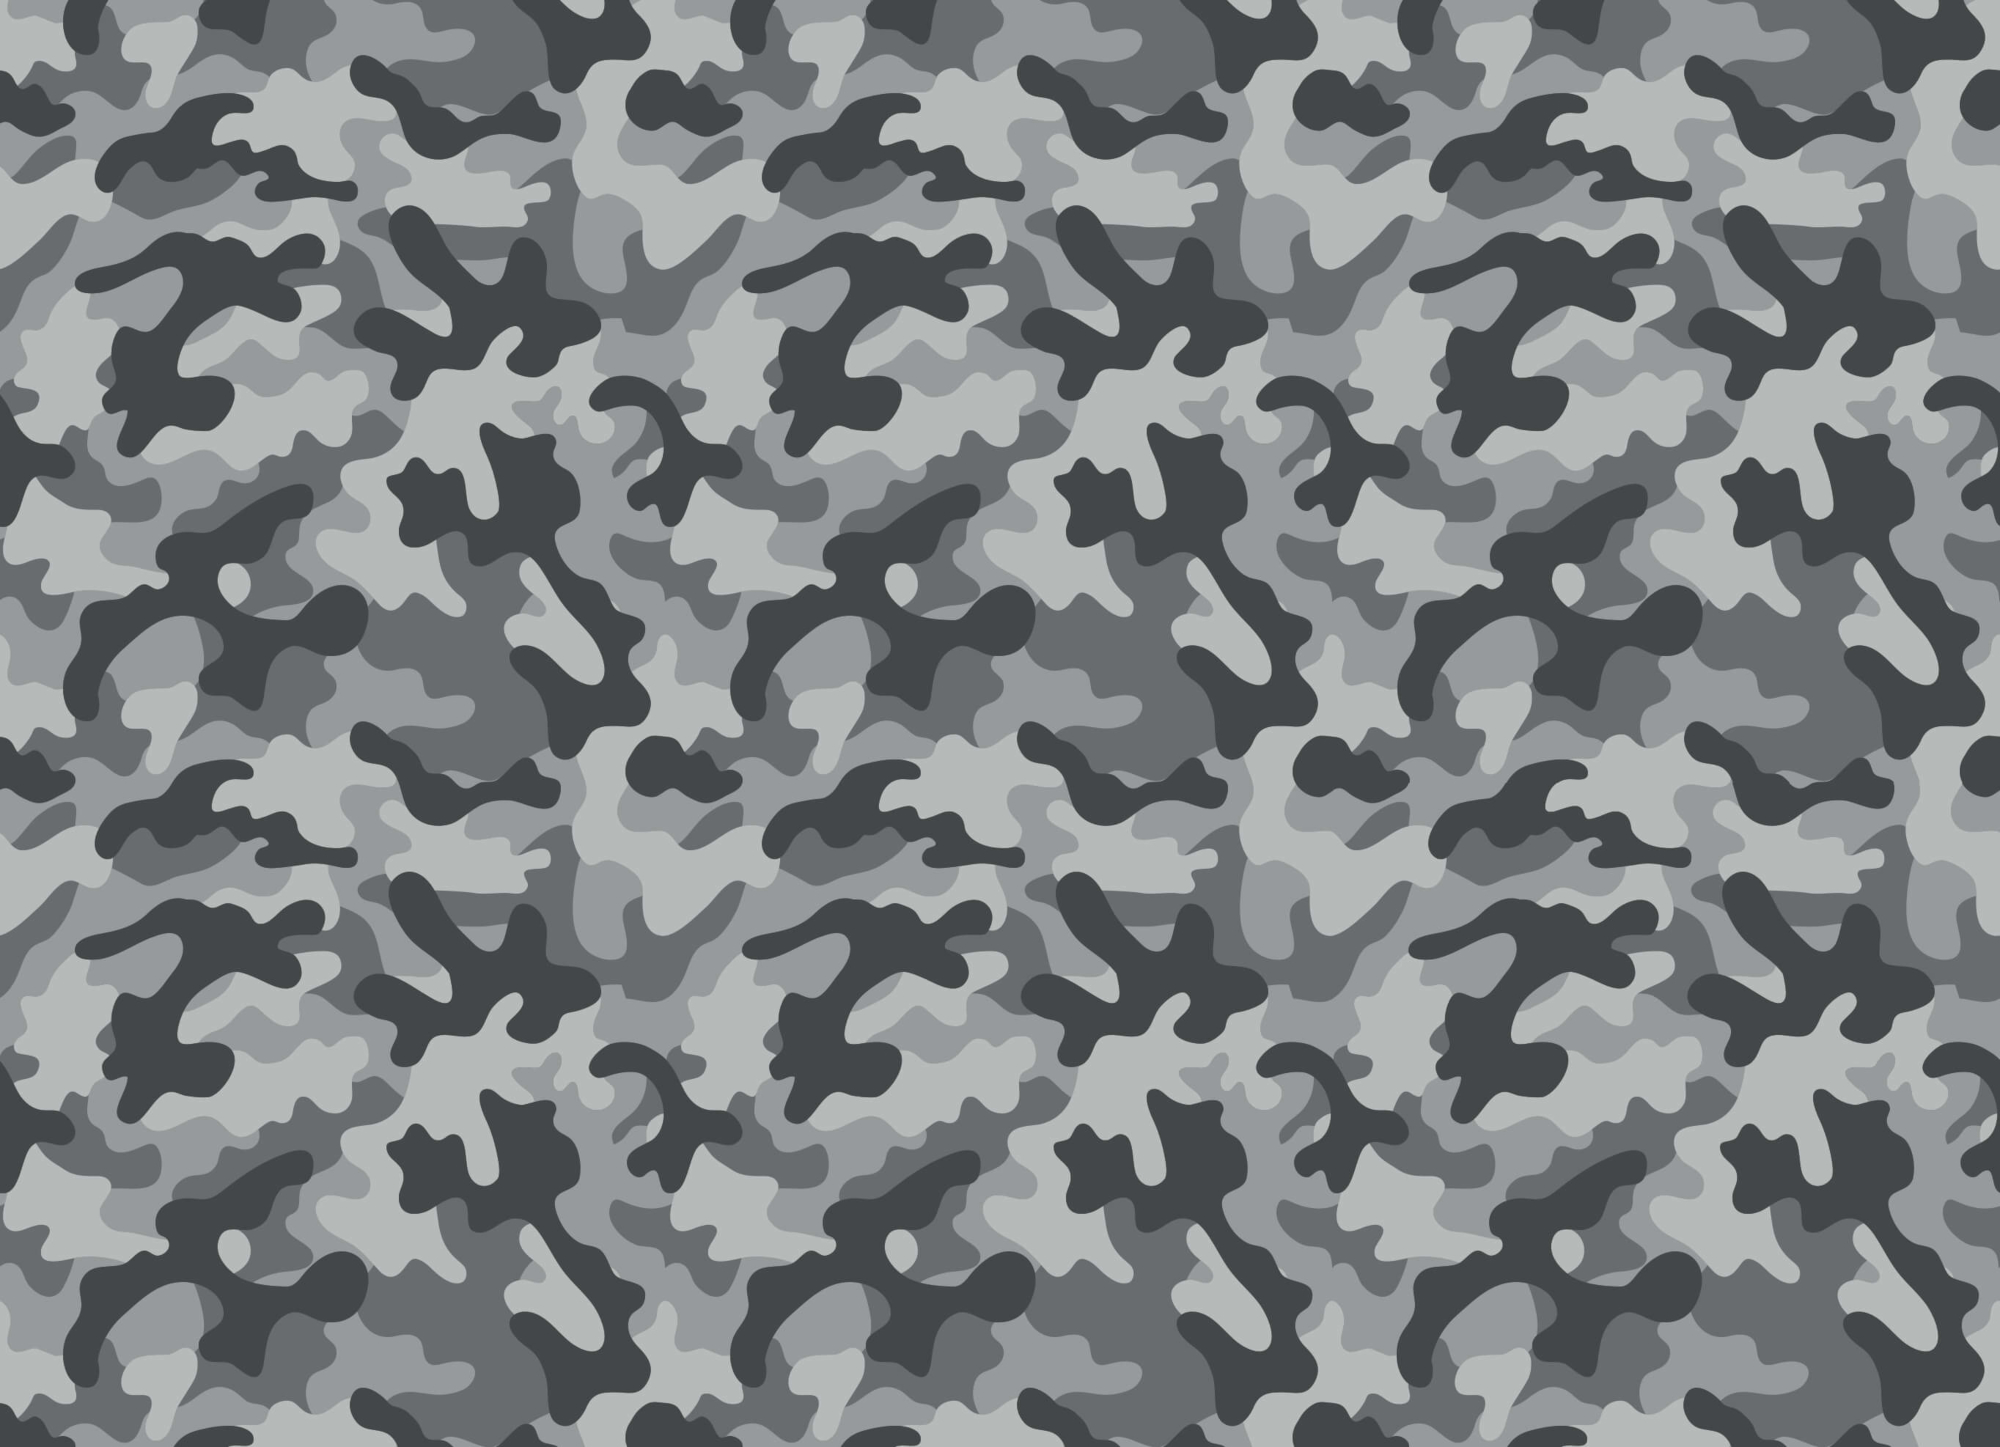 New Lock Screen Wallpapers camouflage, military